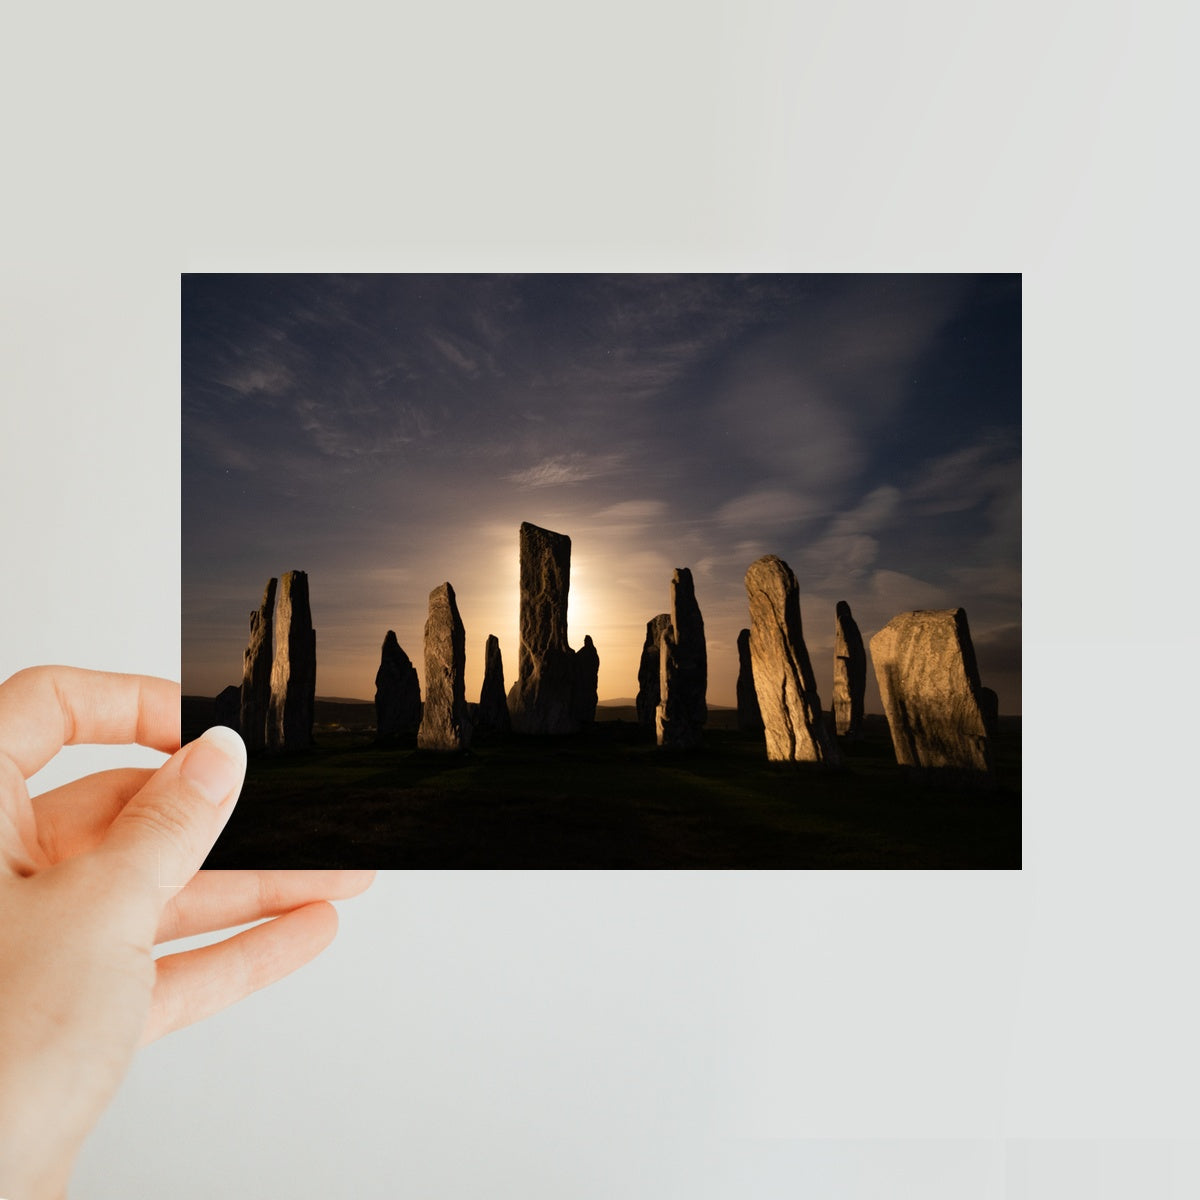 Callanish, Full Moon and Clouds Classic Postcard